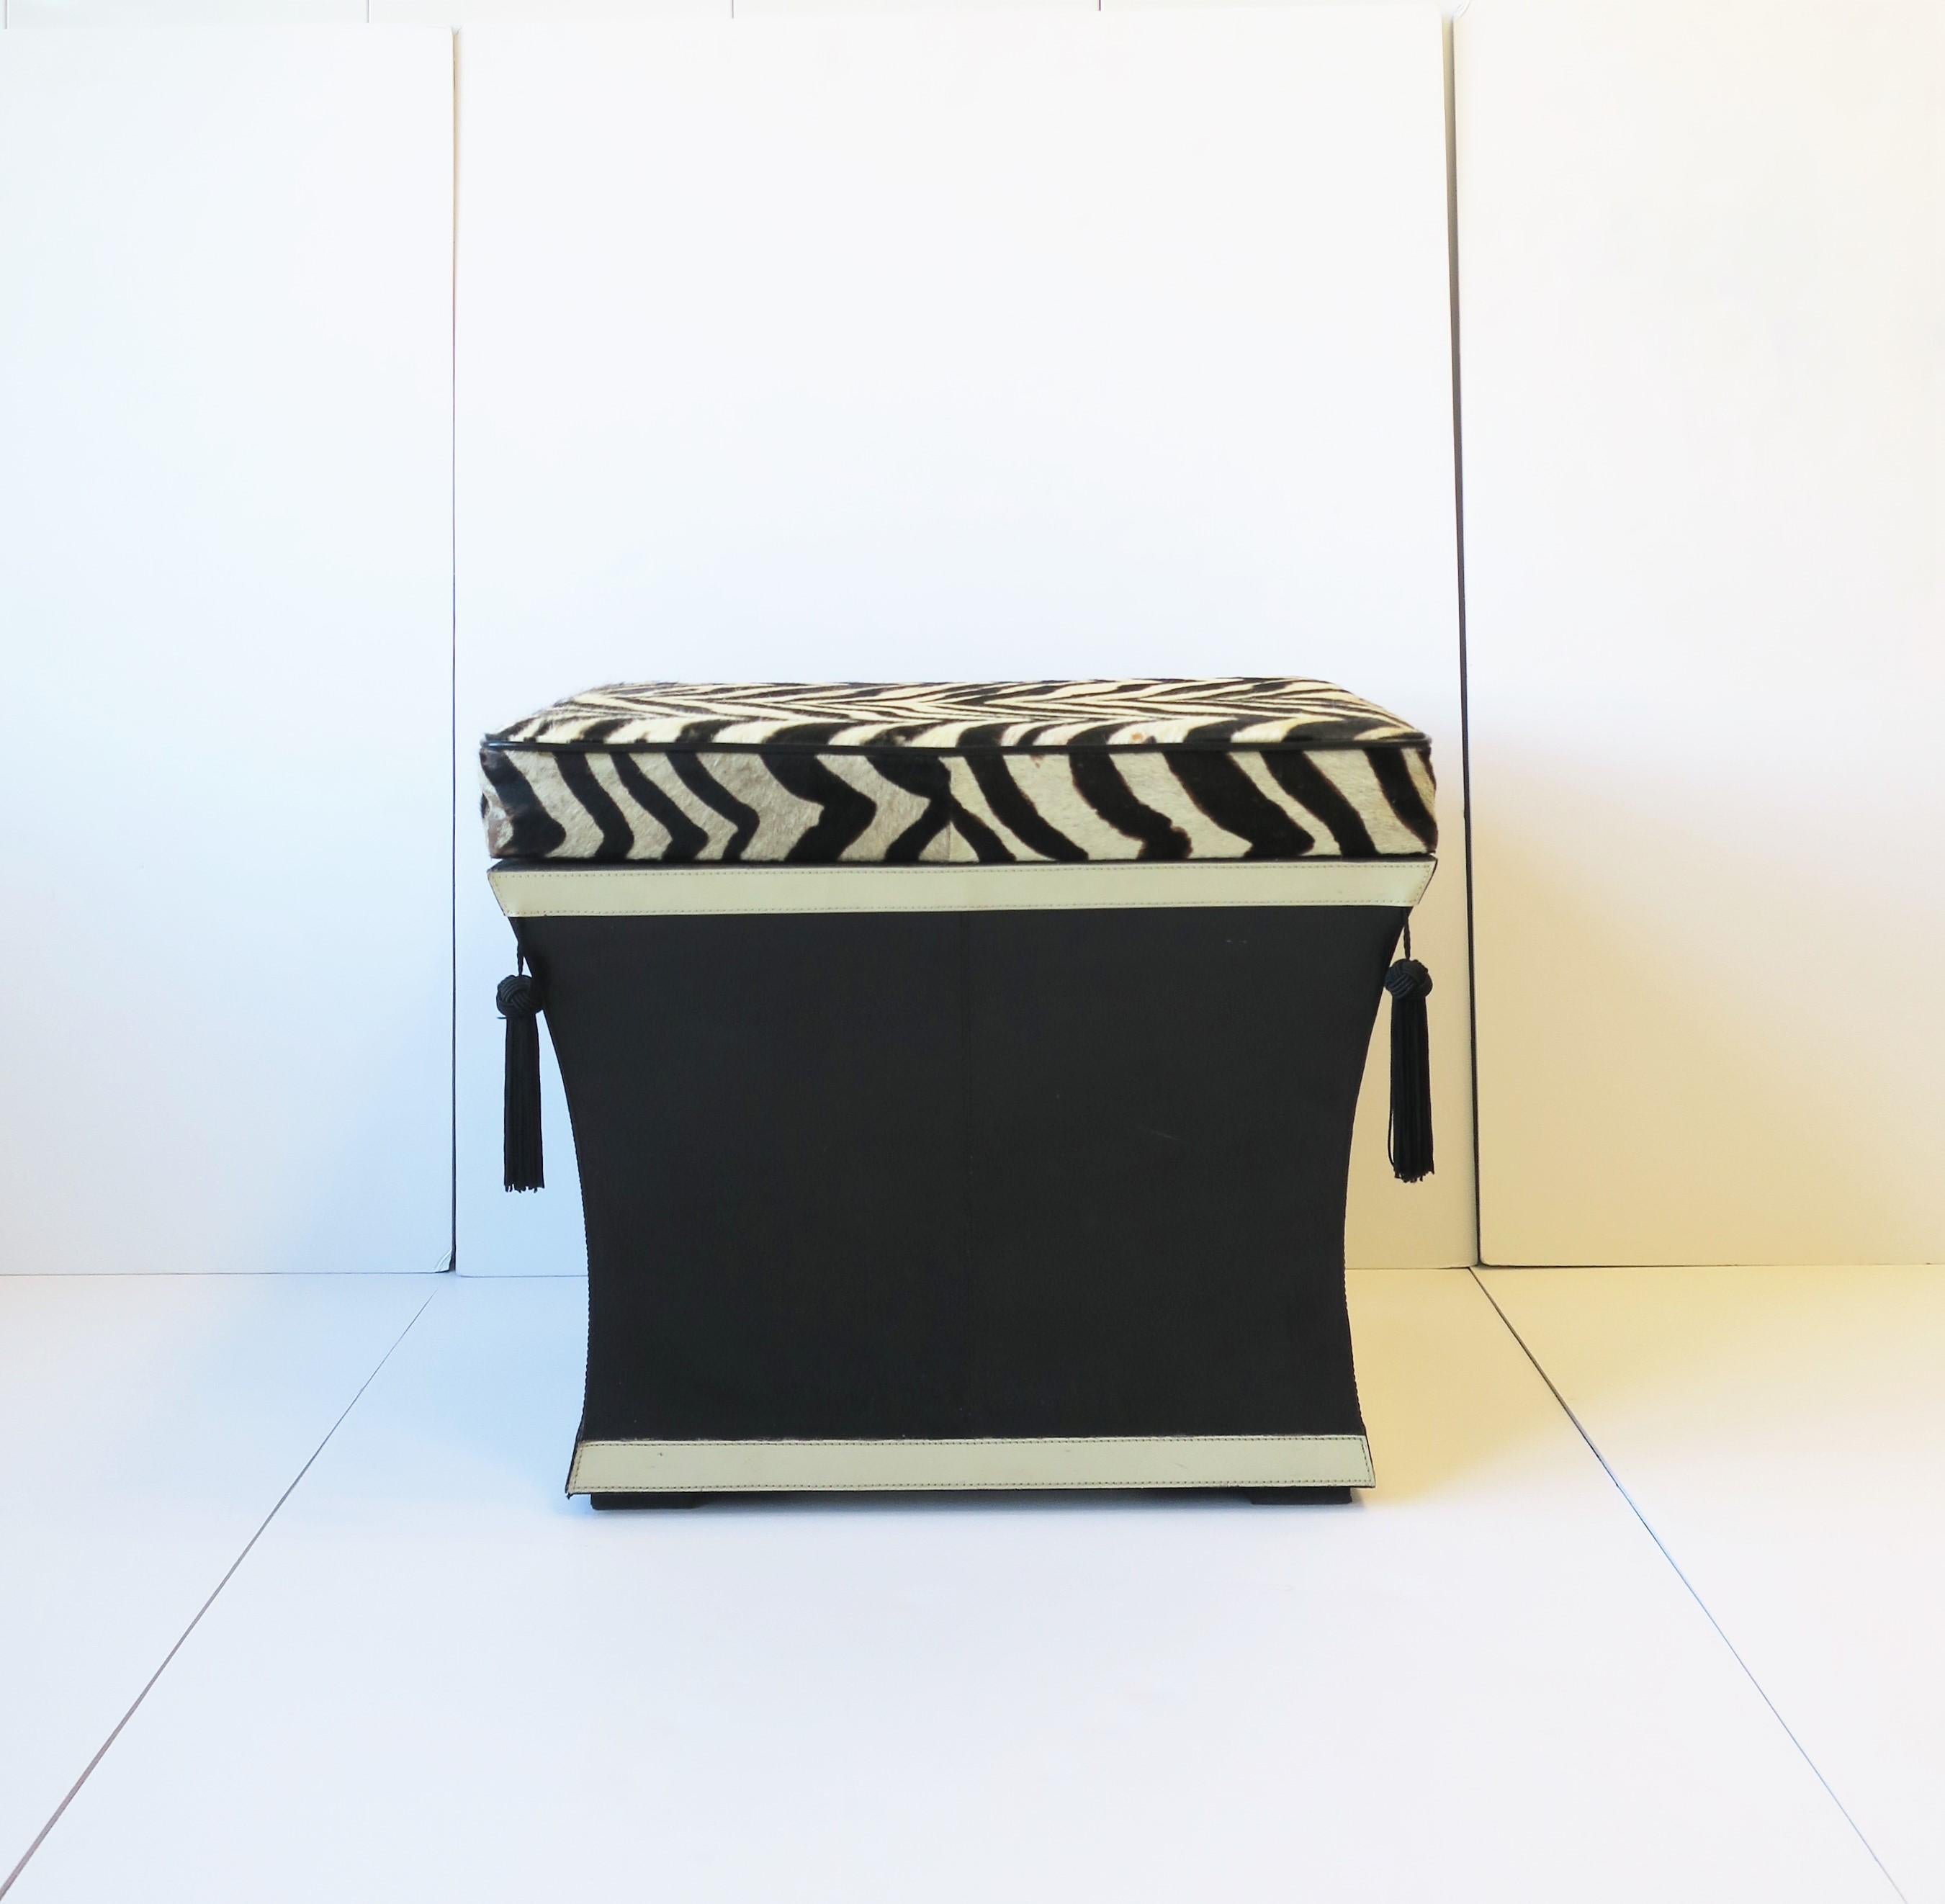 A black and white zebra hide bench/stool/ottoman with storage and tassel design, circa late-20th century, 1980s-1990s. Bench, by Bombay Furniture Co., is rectangular in shape, has authentic animal zebra hide seat cushion with black welting, black